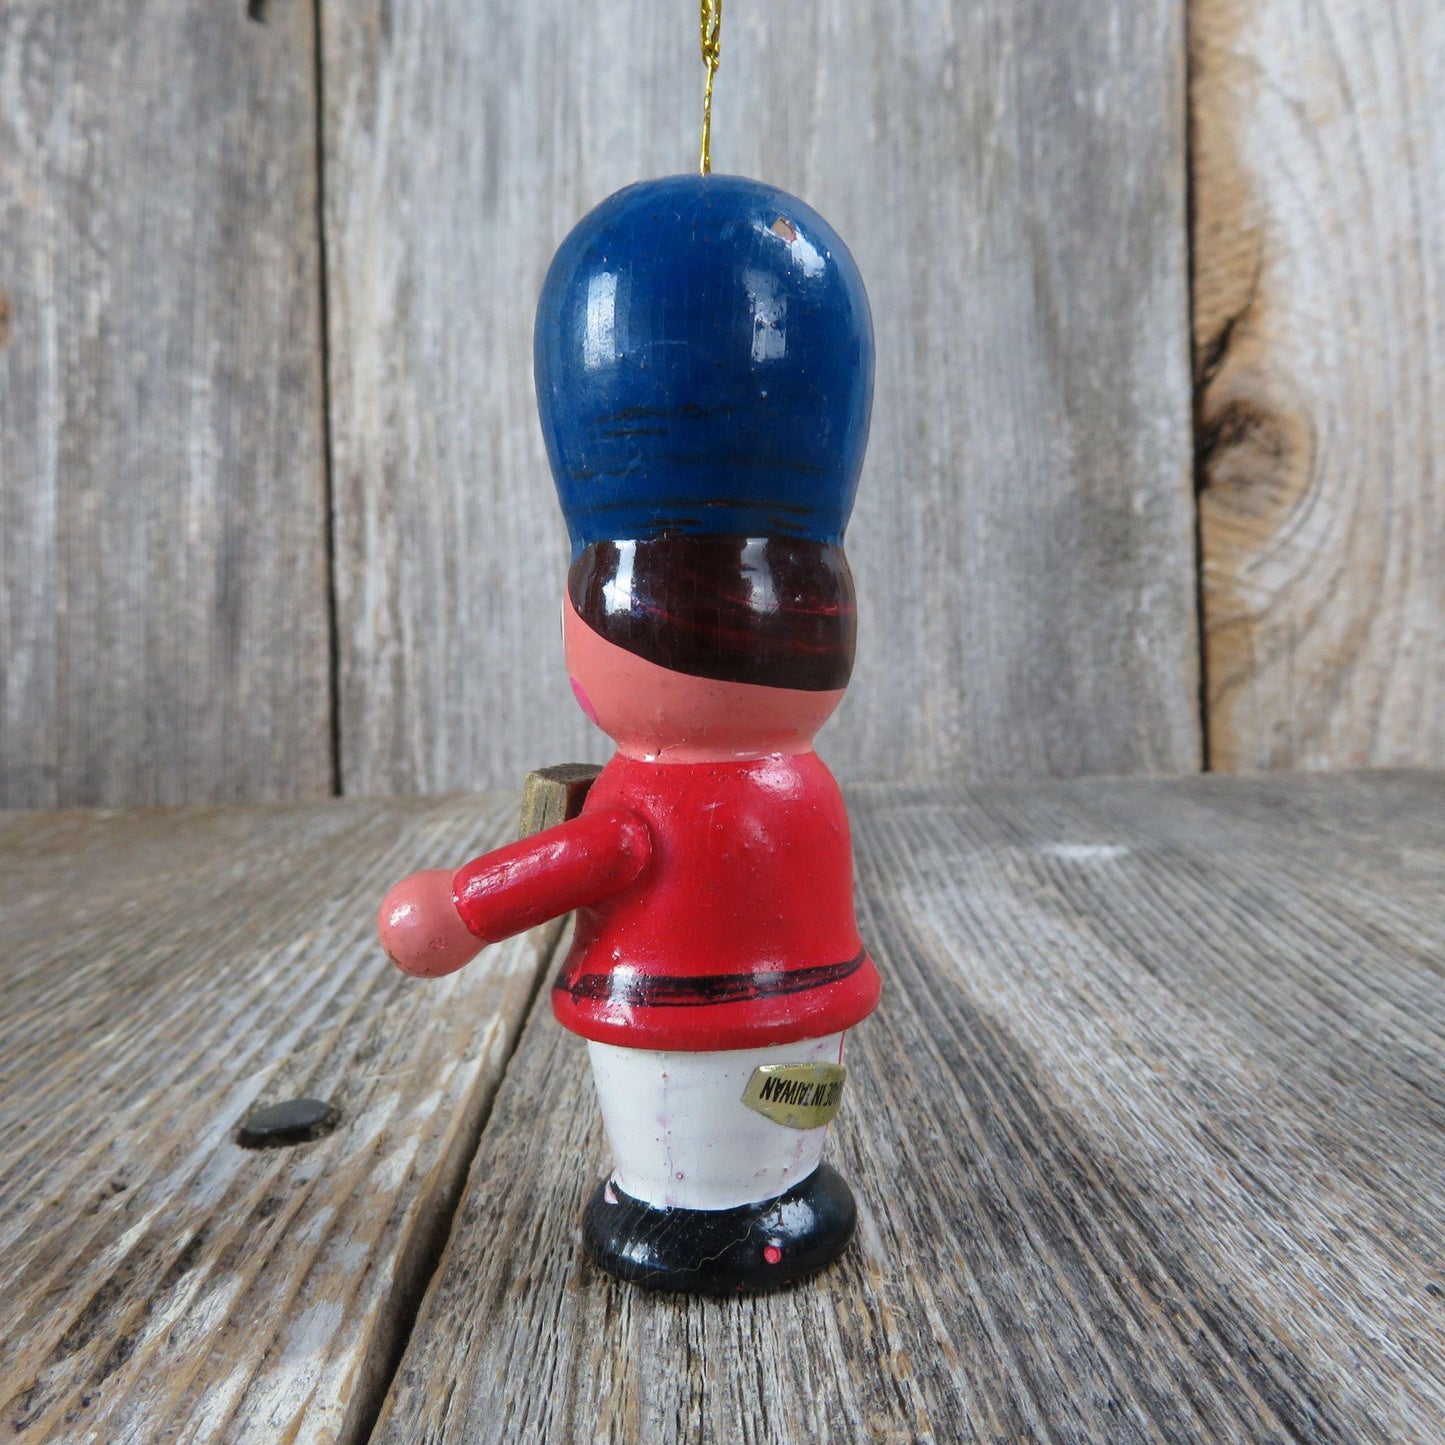 Vintage Wooden Marching Band Ornament Christmas Blue Red Hat Baton Instrument Accordion